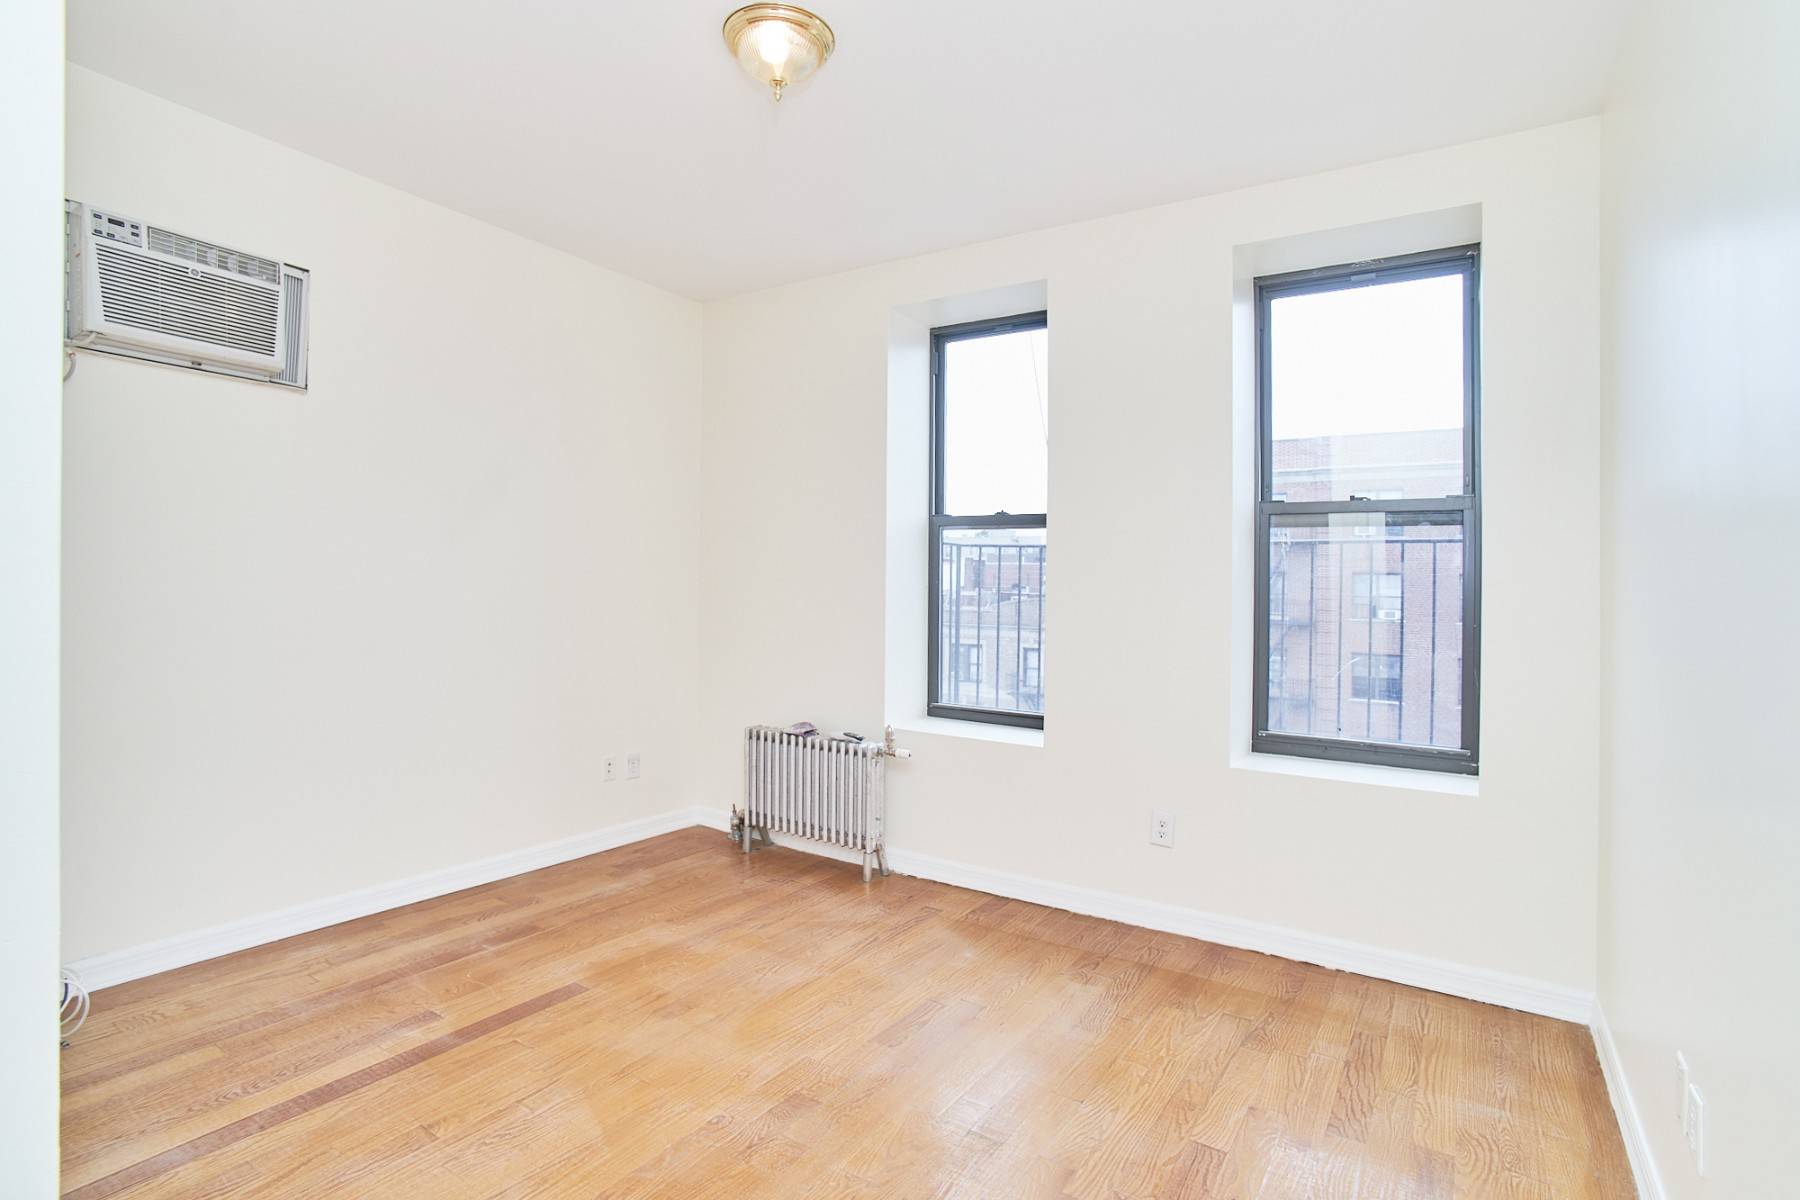 Beautiful 2 bedroom located on the 5th floor of a prewar building.